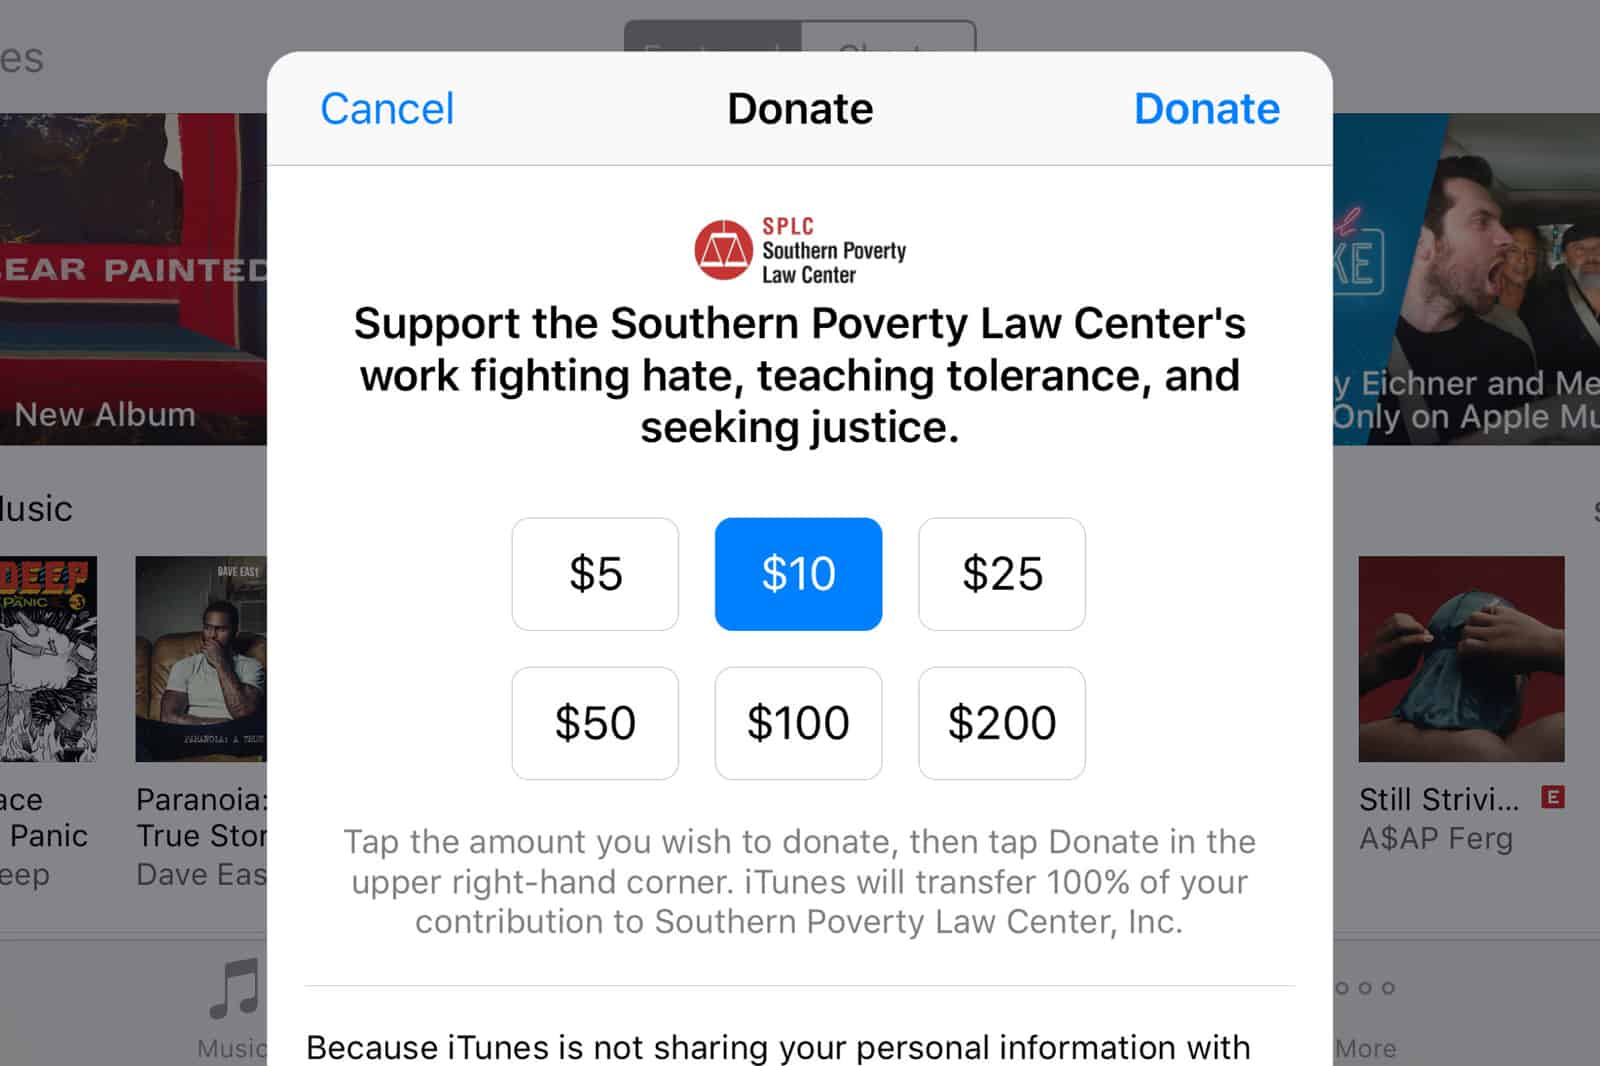 Image of SPLC donations page in iTunes.